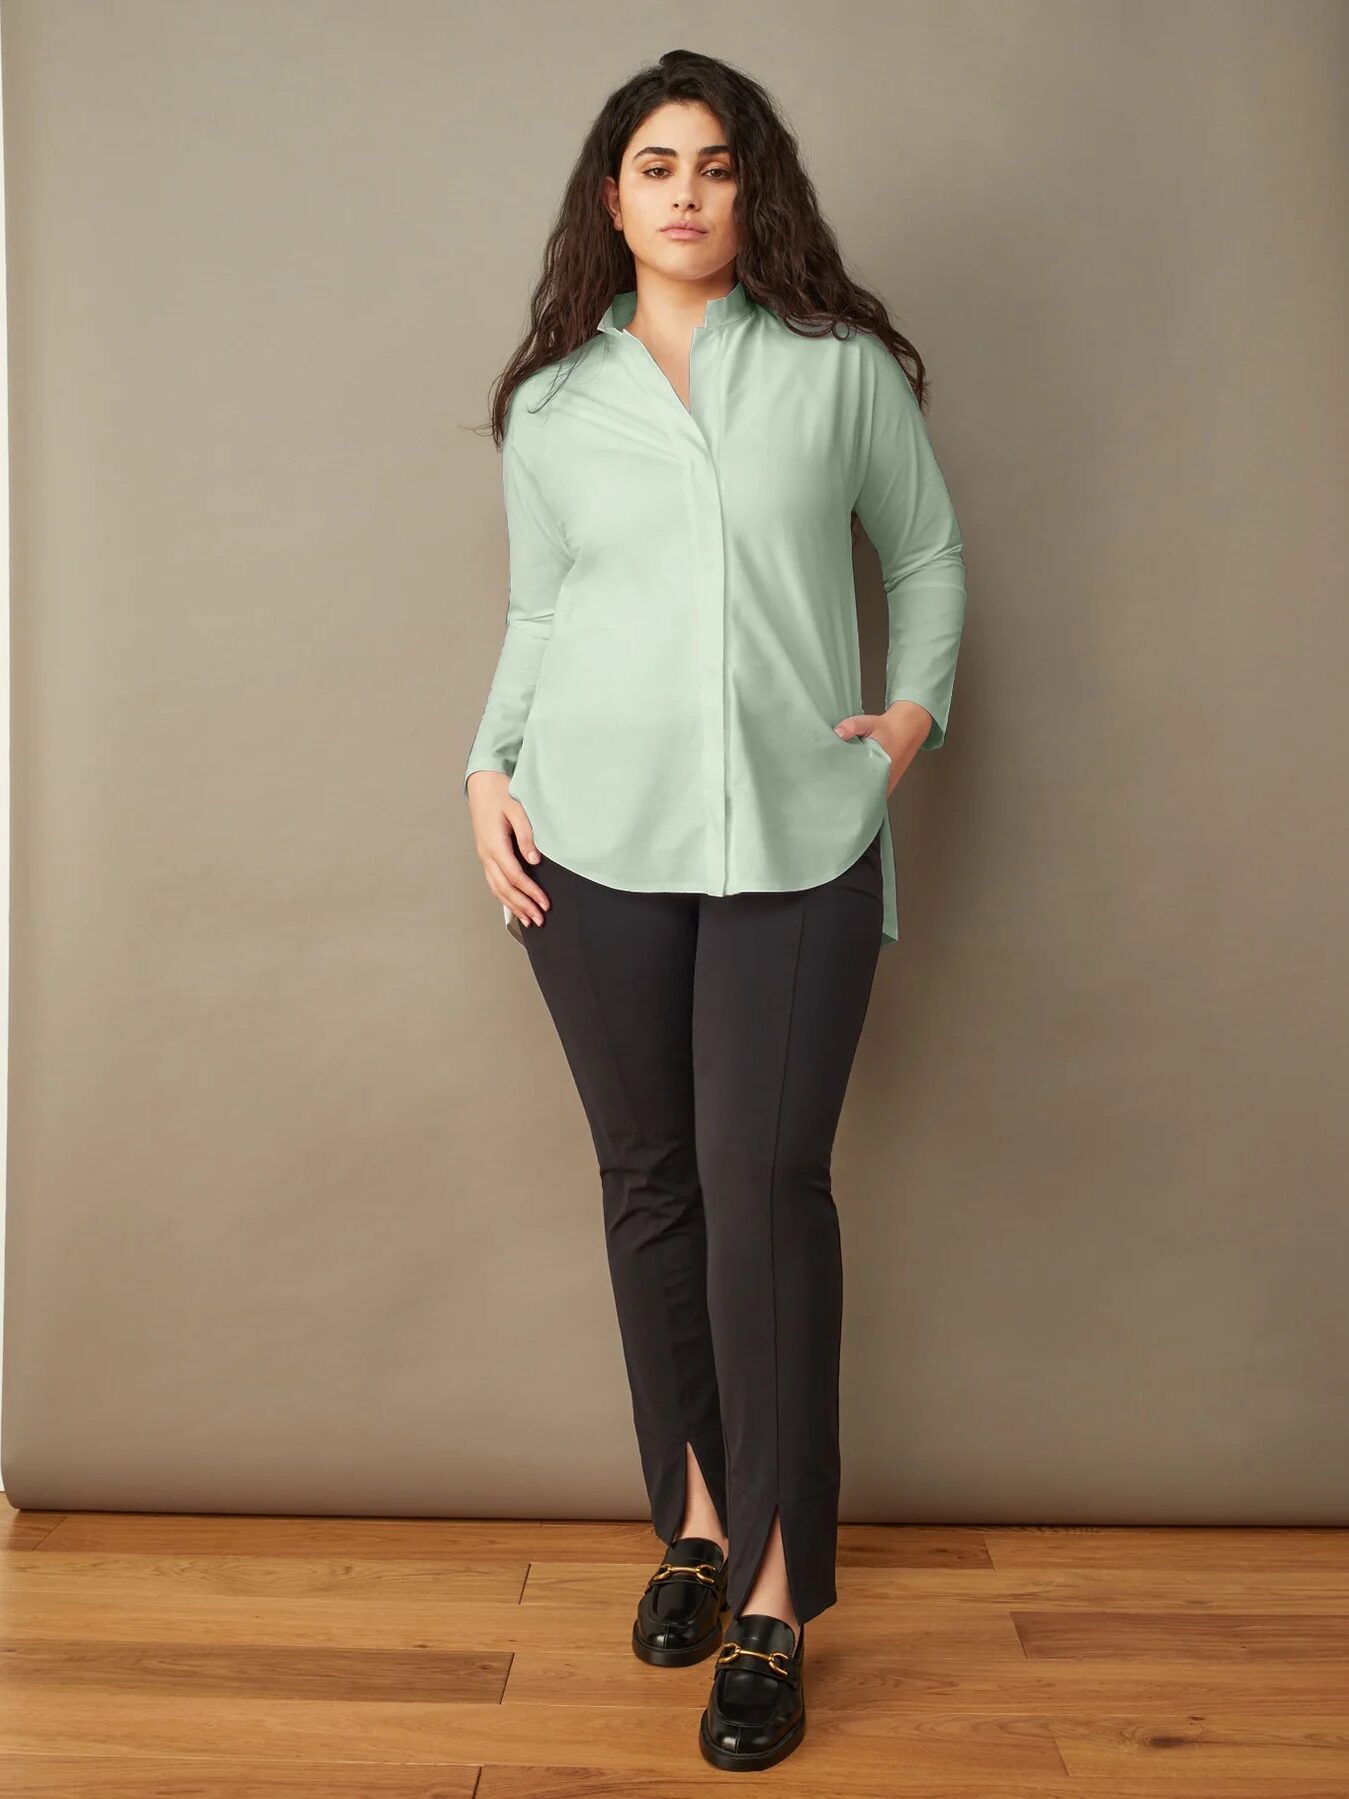 Woman standing against a neutral backdrop, wearing a light green blouse, black trousers, and black shoes.